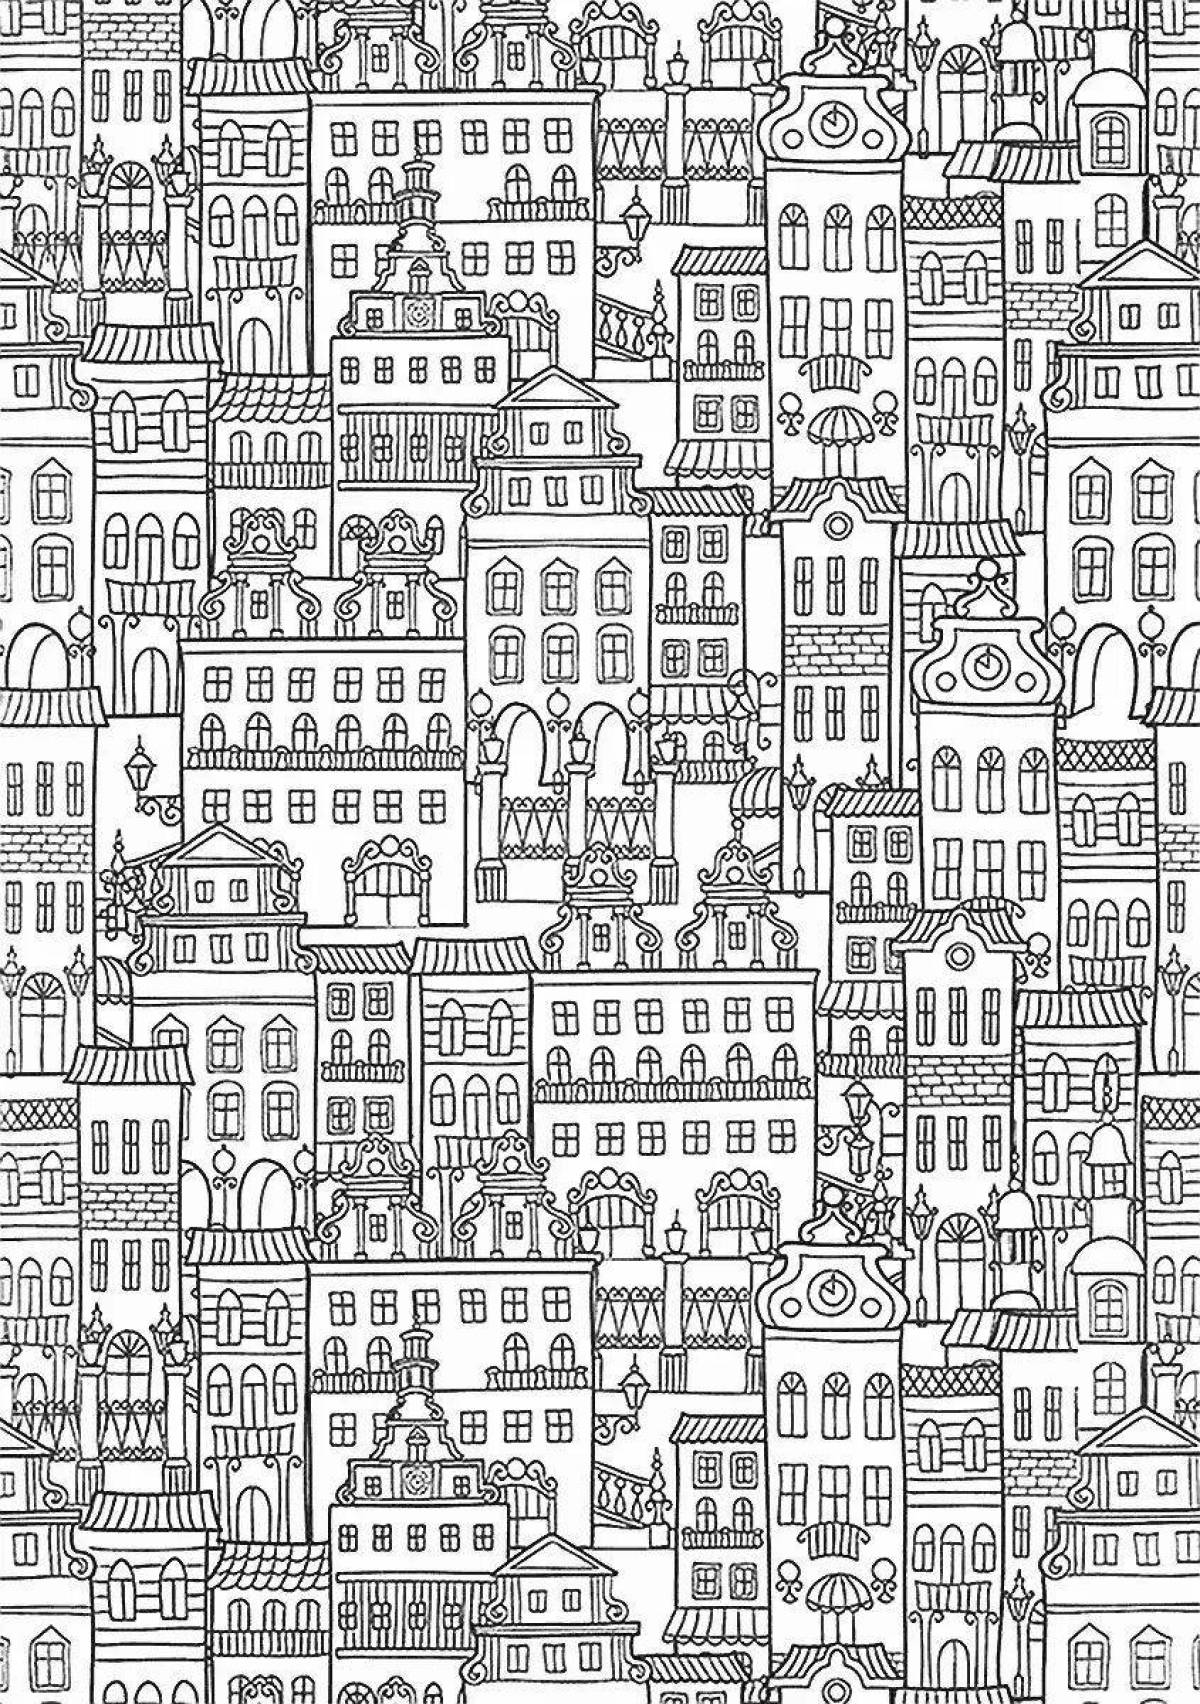 Adorable city coloring book for adults